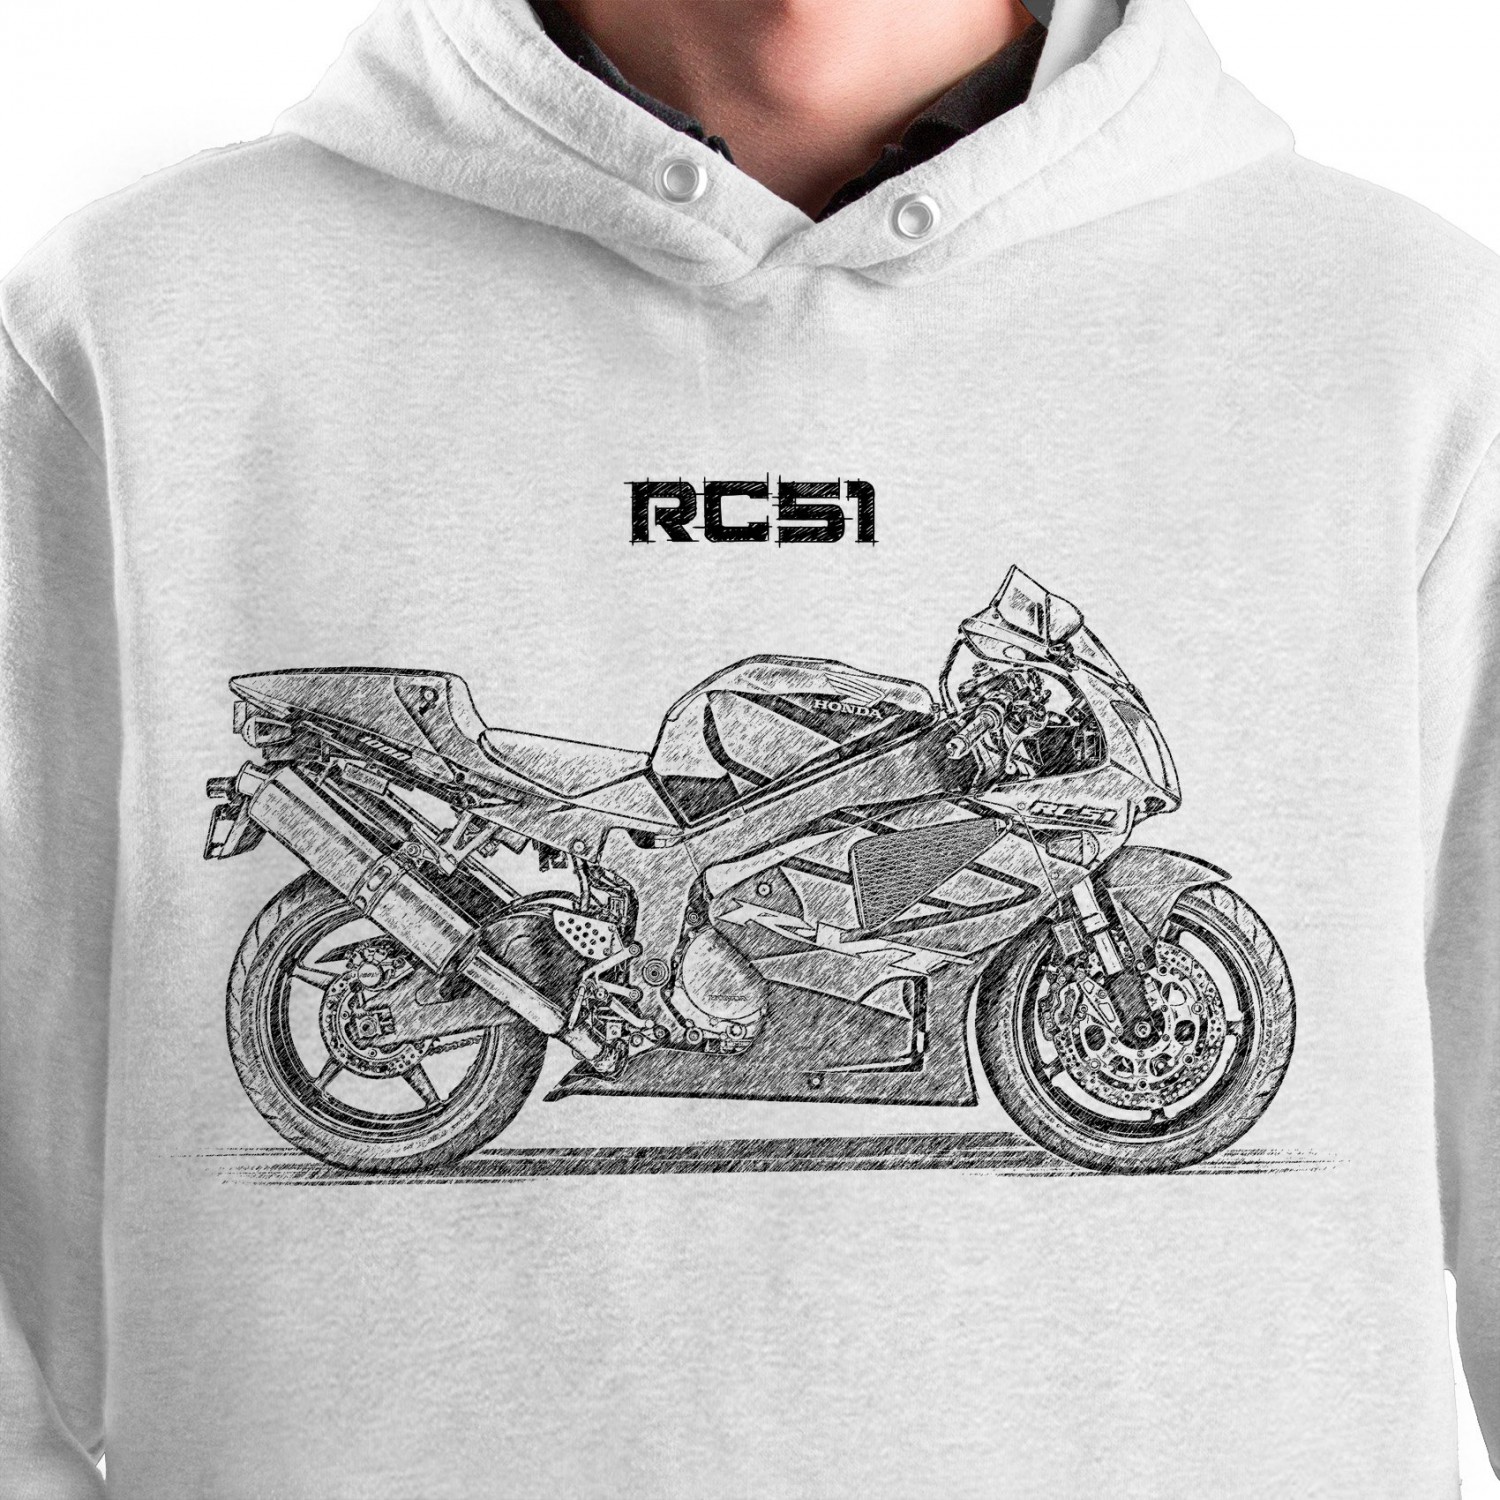 White T-shirt with Honda RVT1000R. Gift for motorcyclist.